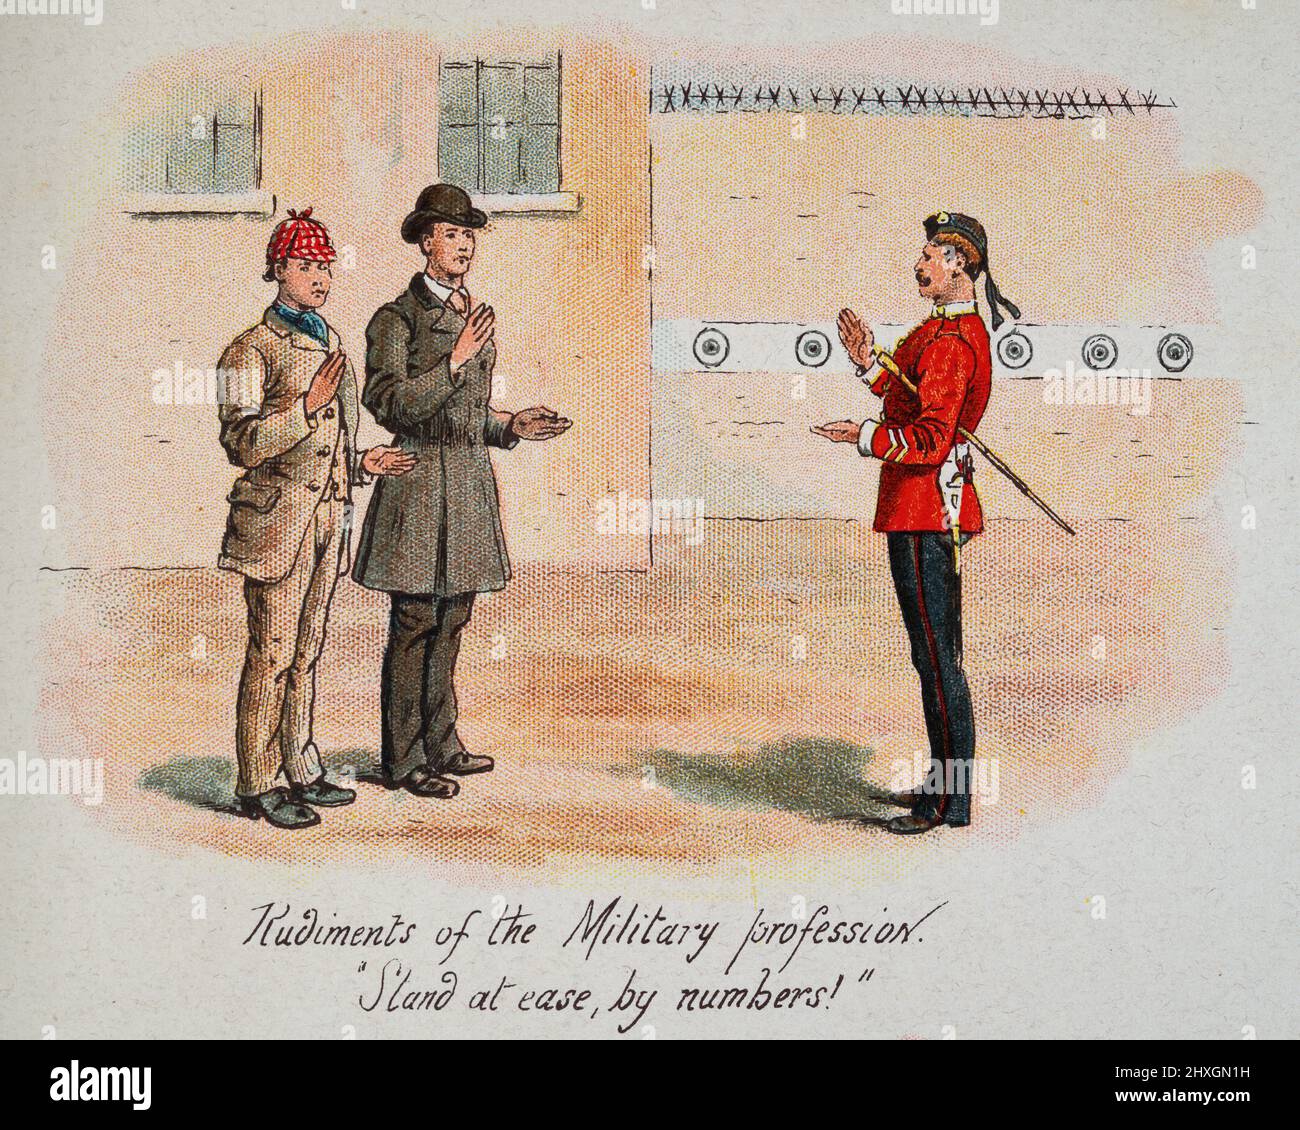 Vintage illustration of Rudiments of the MIlitary profession, Stand at ease by numbers. Victorian British military 19th Century Stock Photo